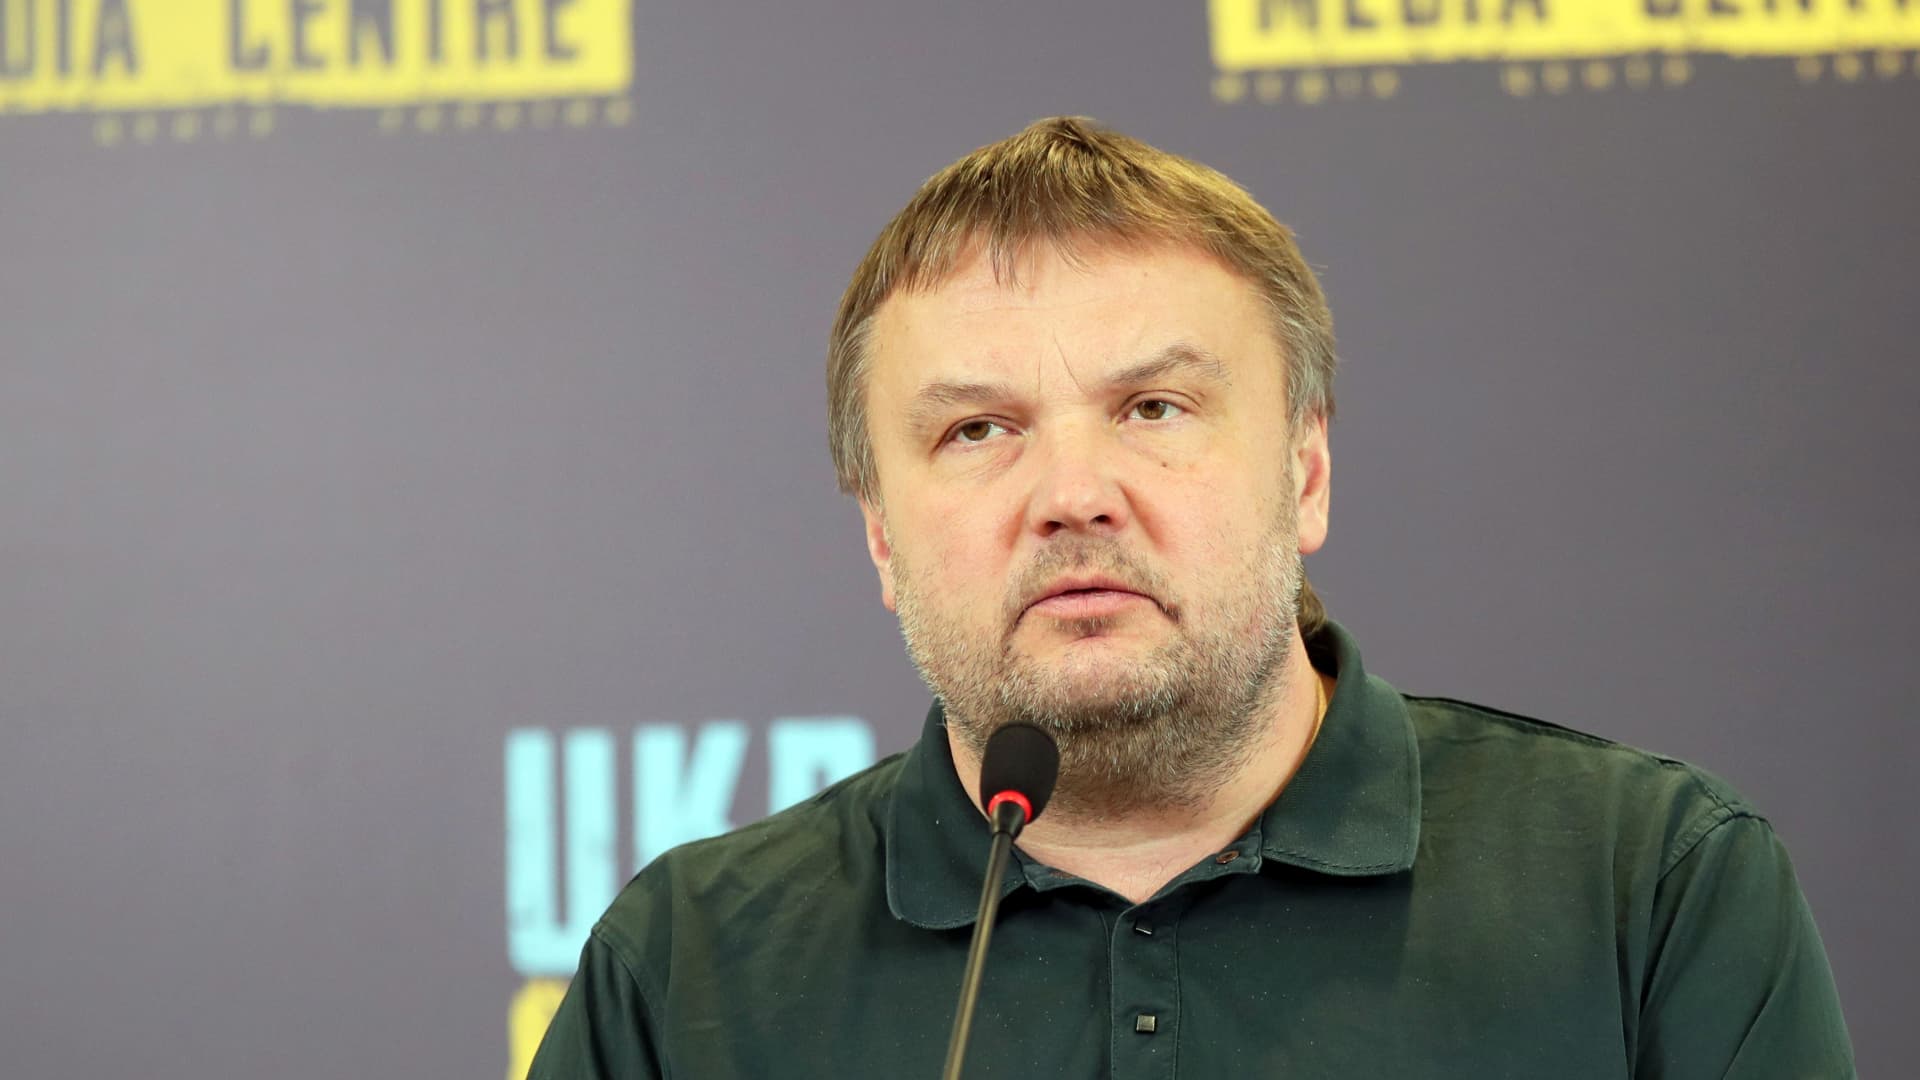 Vadym Denysenko, an advisor to Ukraine's interior minister, speaks during a briefing on March 14, 2022.